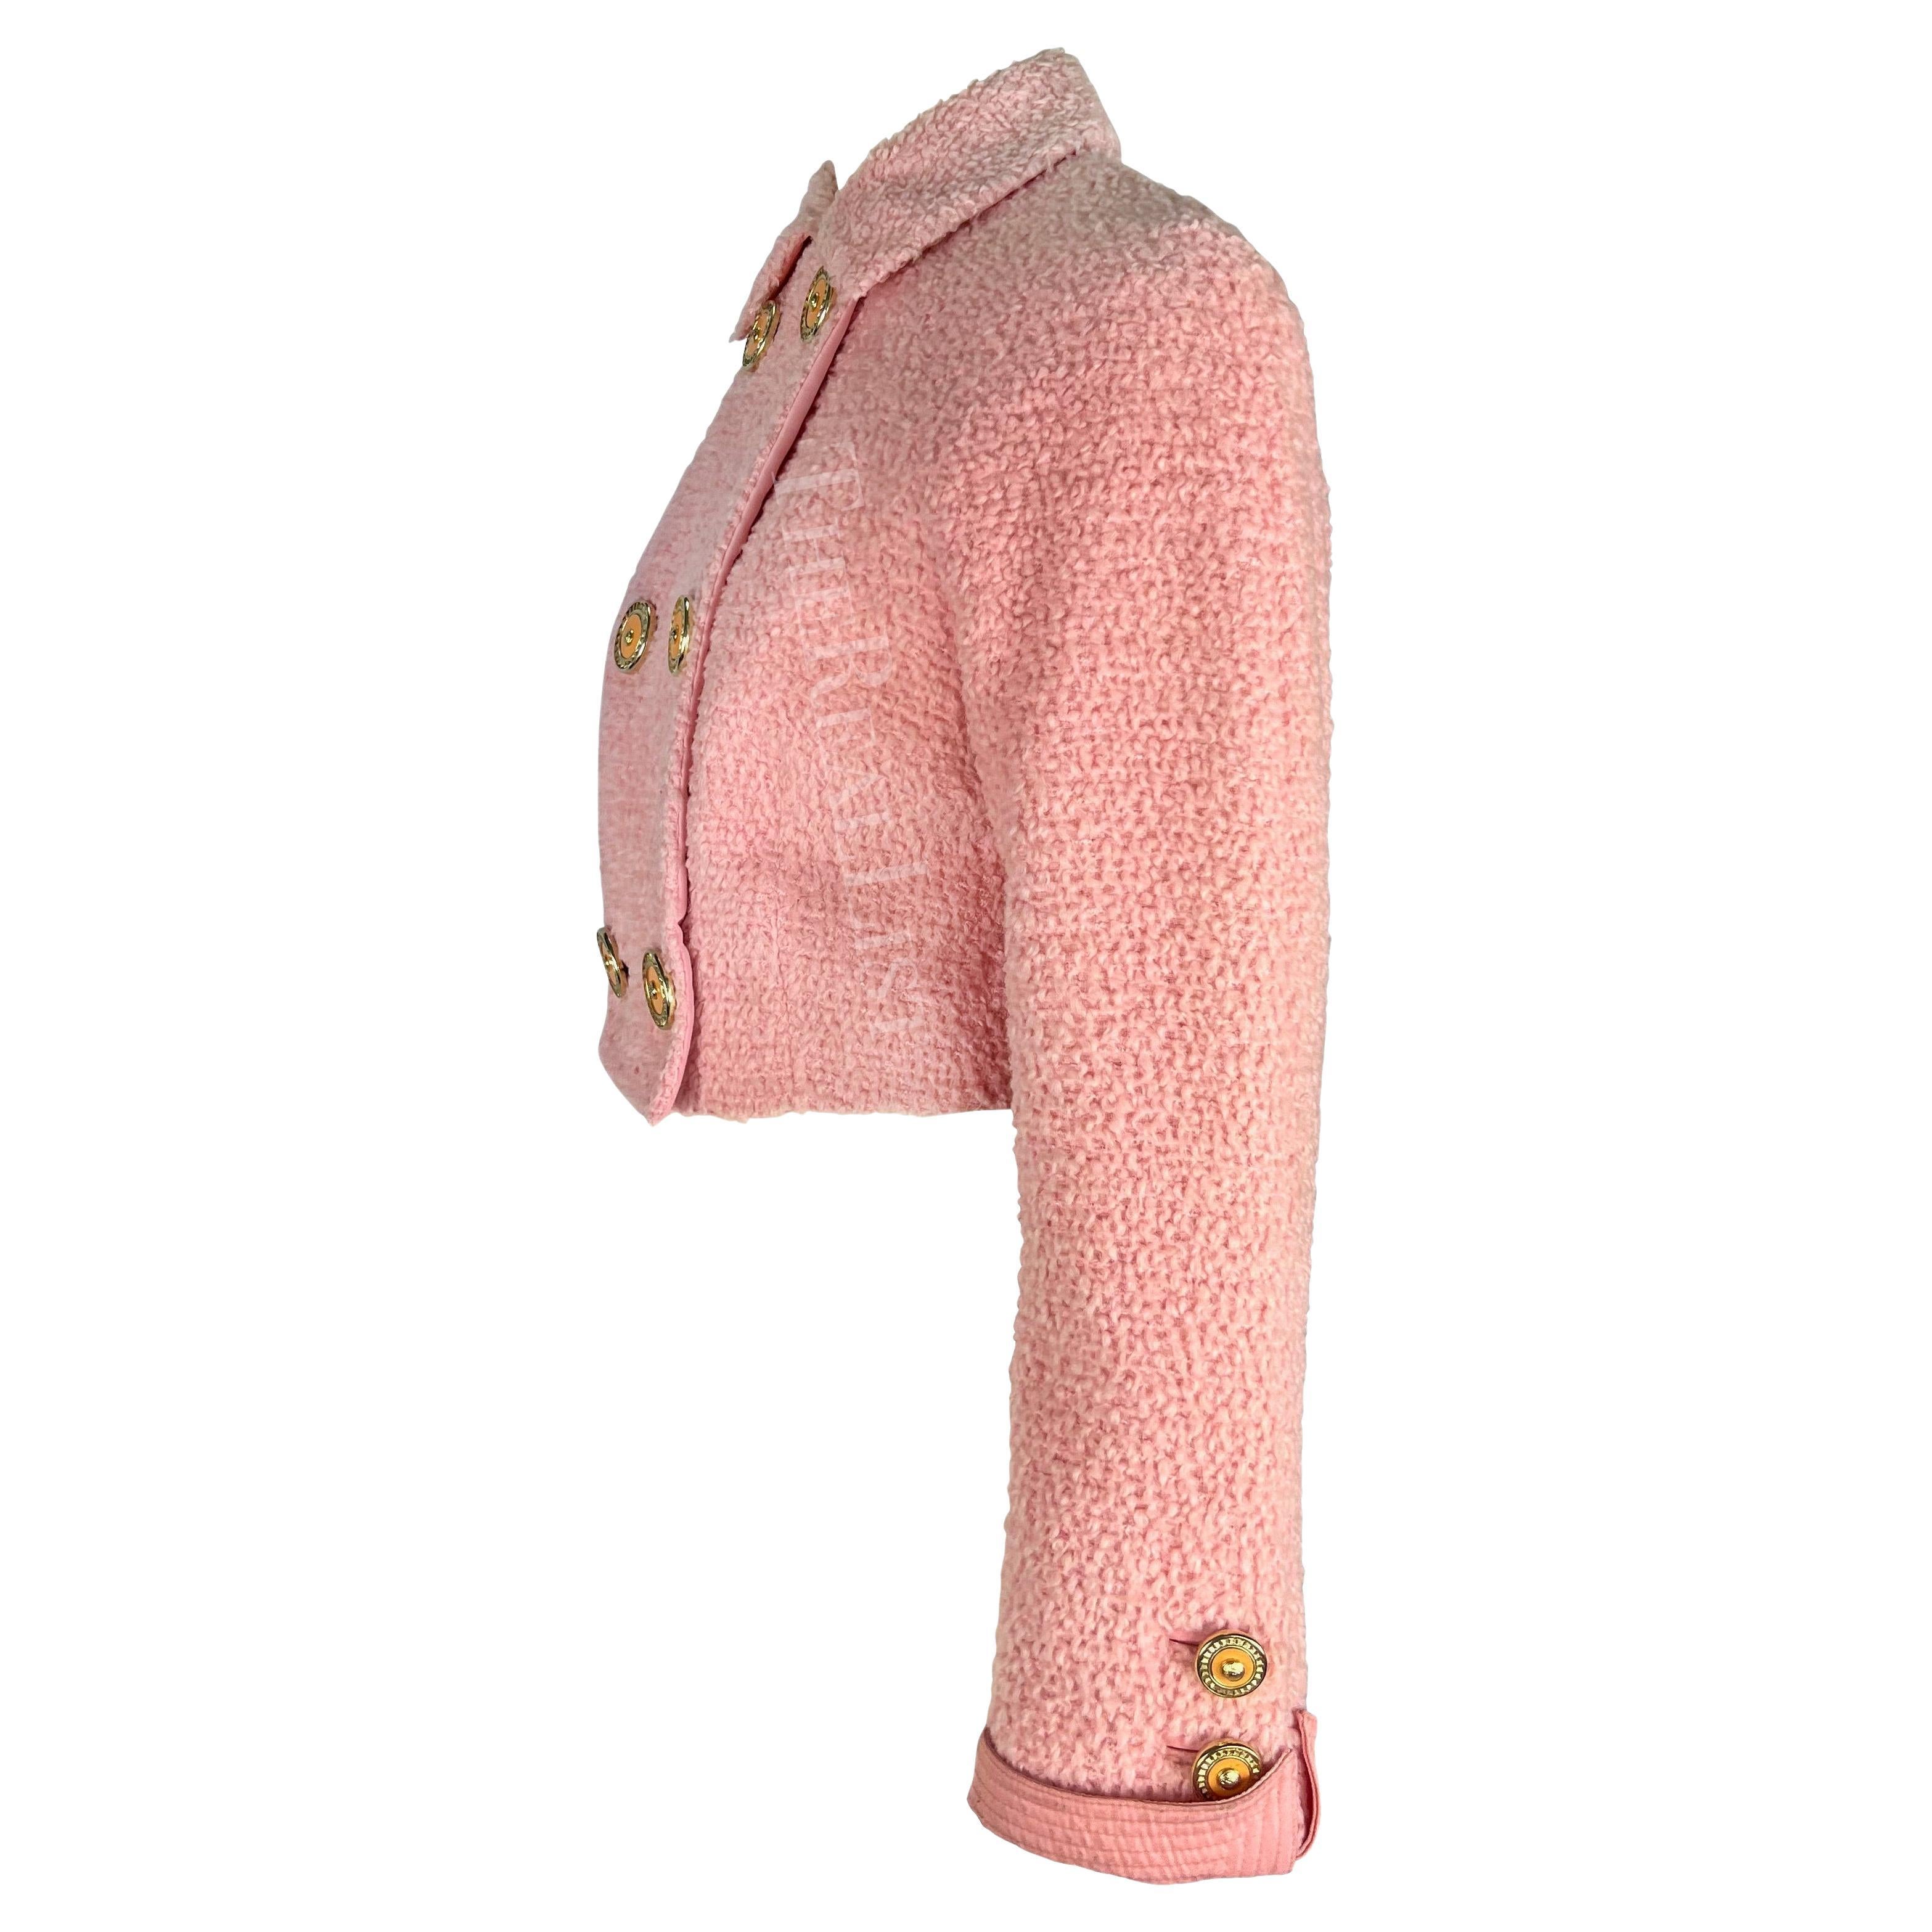 F/W 1994 Gianni Versace Light Pink Tweed Cropped Double Breasted Runway Jacket For Sale 1